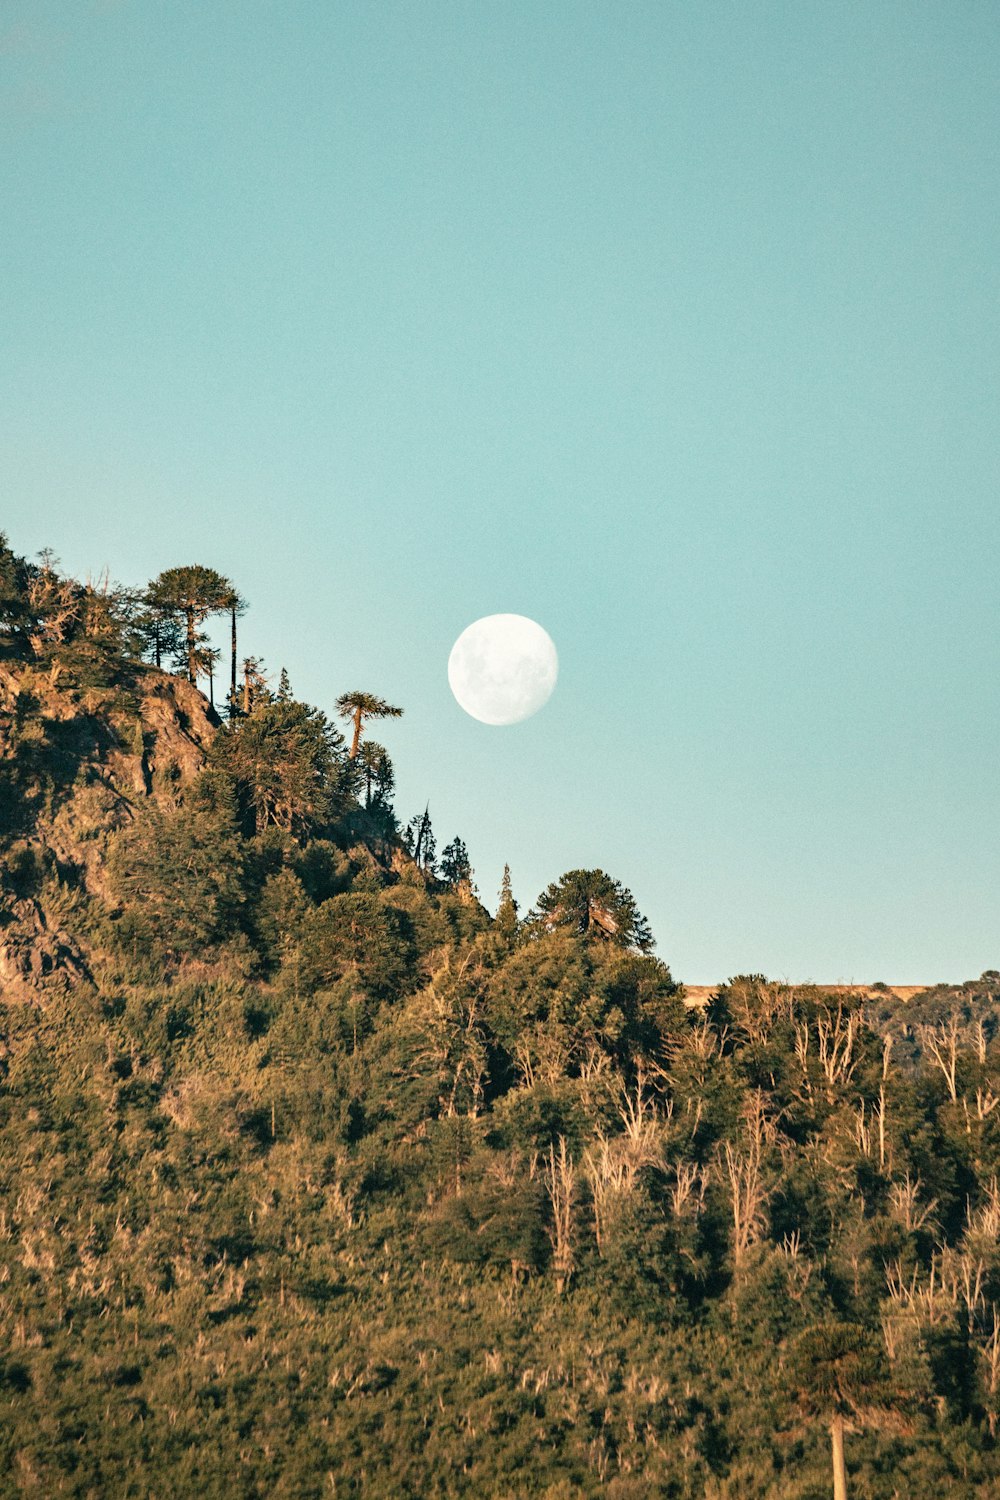 a full moon is seen over a forested area